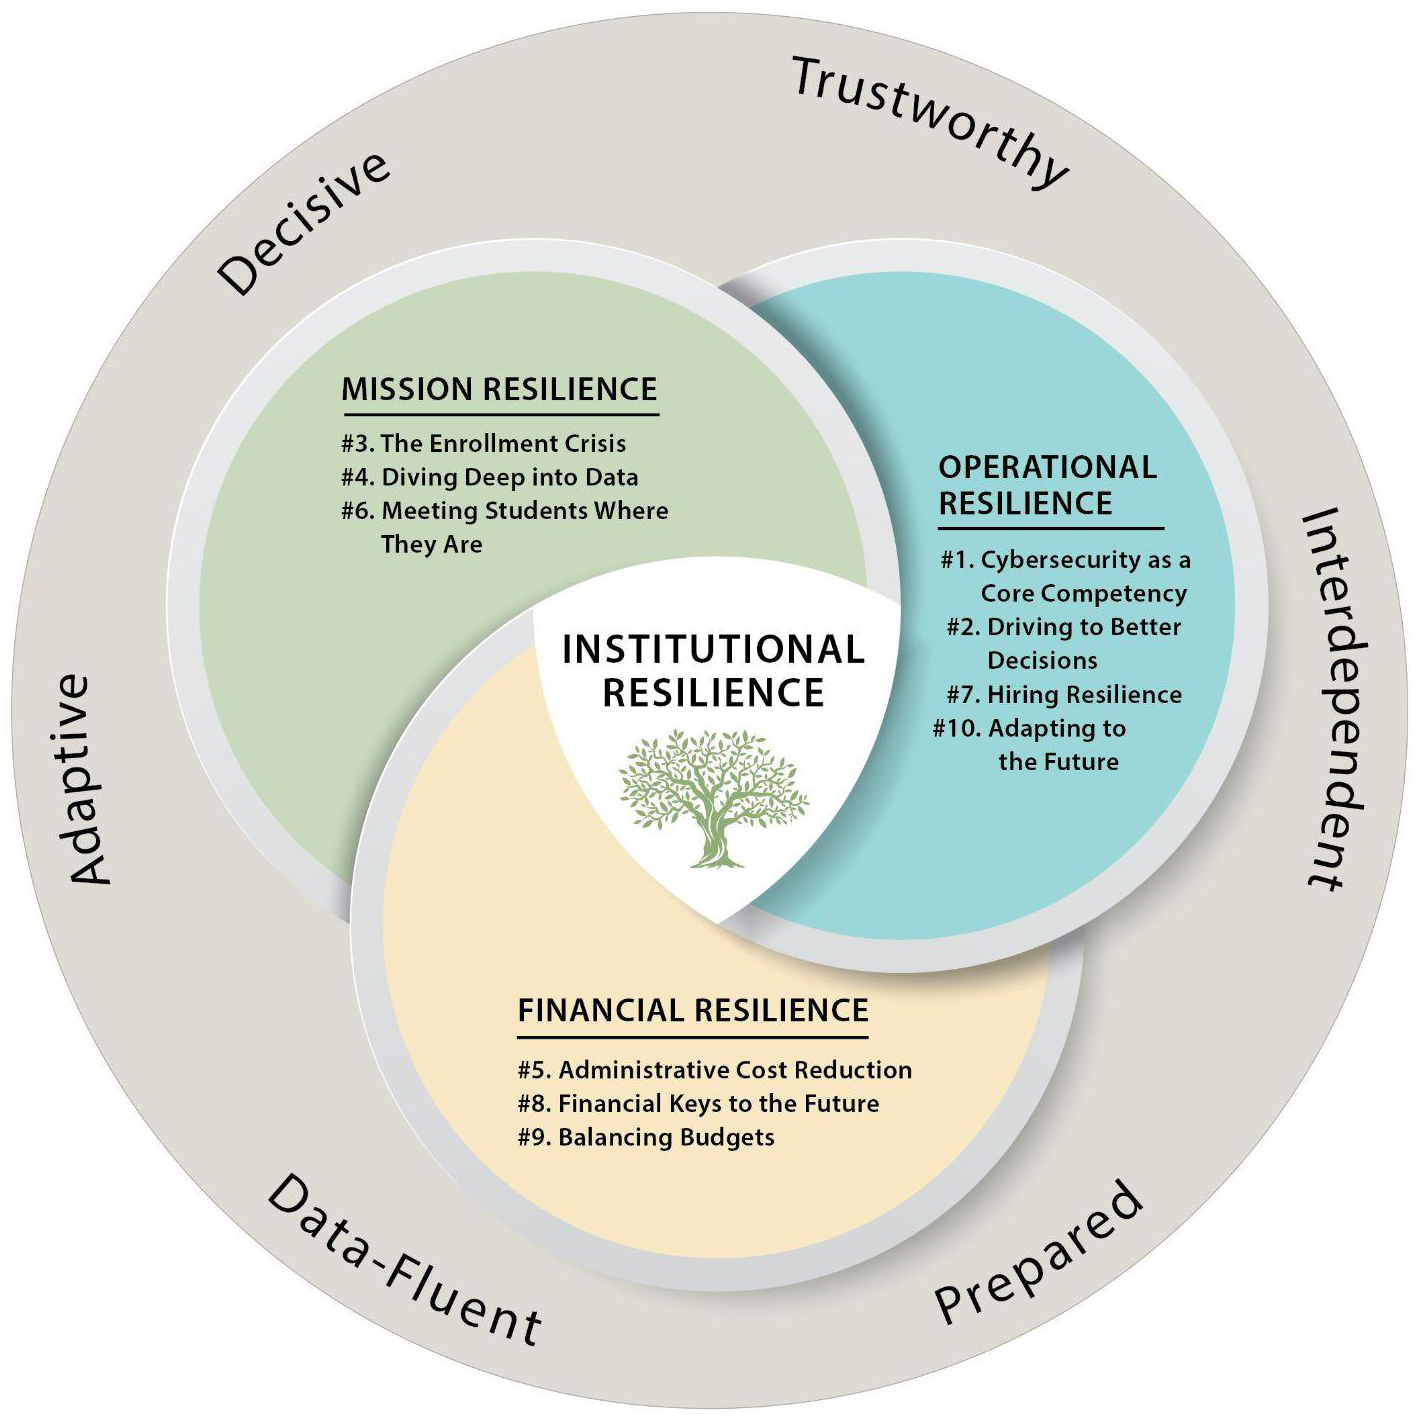 Venn Diagram. Center where all 3 circles overlap says 'Institutional Resilience'. In a circle surrounding the diagram are the words: Decisive, Trustworthy, Interdependent, Prepared, Data-Fluent, Adaptive. The three circles are:   Mission Resilience | #3. The Enrollment Crisis: Harnessing data to empower decision-makers; #4. Diving Deep into Data: Leveraging analytics for actionable insights to improve learning and student success; #6. Meeting Students Where They Are: Providing universal access to institutional services.  Operational Resilience | #1. Cybersecurity as a Core Competency: Balancing cost and risk; #2. Driving to Better Decisions: Improving data quality and governance; #7. Hiring Resilience: Recruiting and retaining IT talent under adverse circumstances; #10. Adapting to the Future: Cultivating institutional agility. Financial Resilience | #5. Administrative Cost Reduction: Streamlining processes, data, and technologies; #8. Financial Keys to the Future: Using technology and data to help make tough choices; #9. Balancing Budgets: Taking control of IT cost and vendor management.